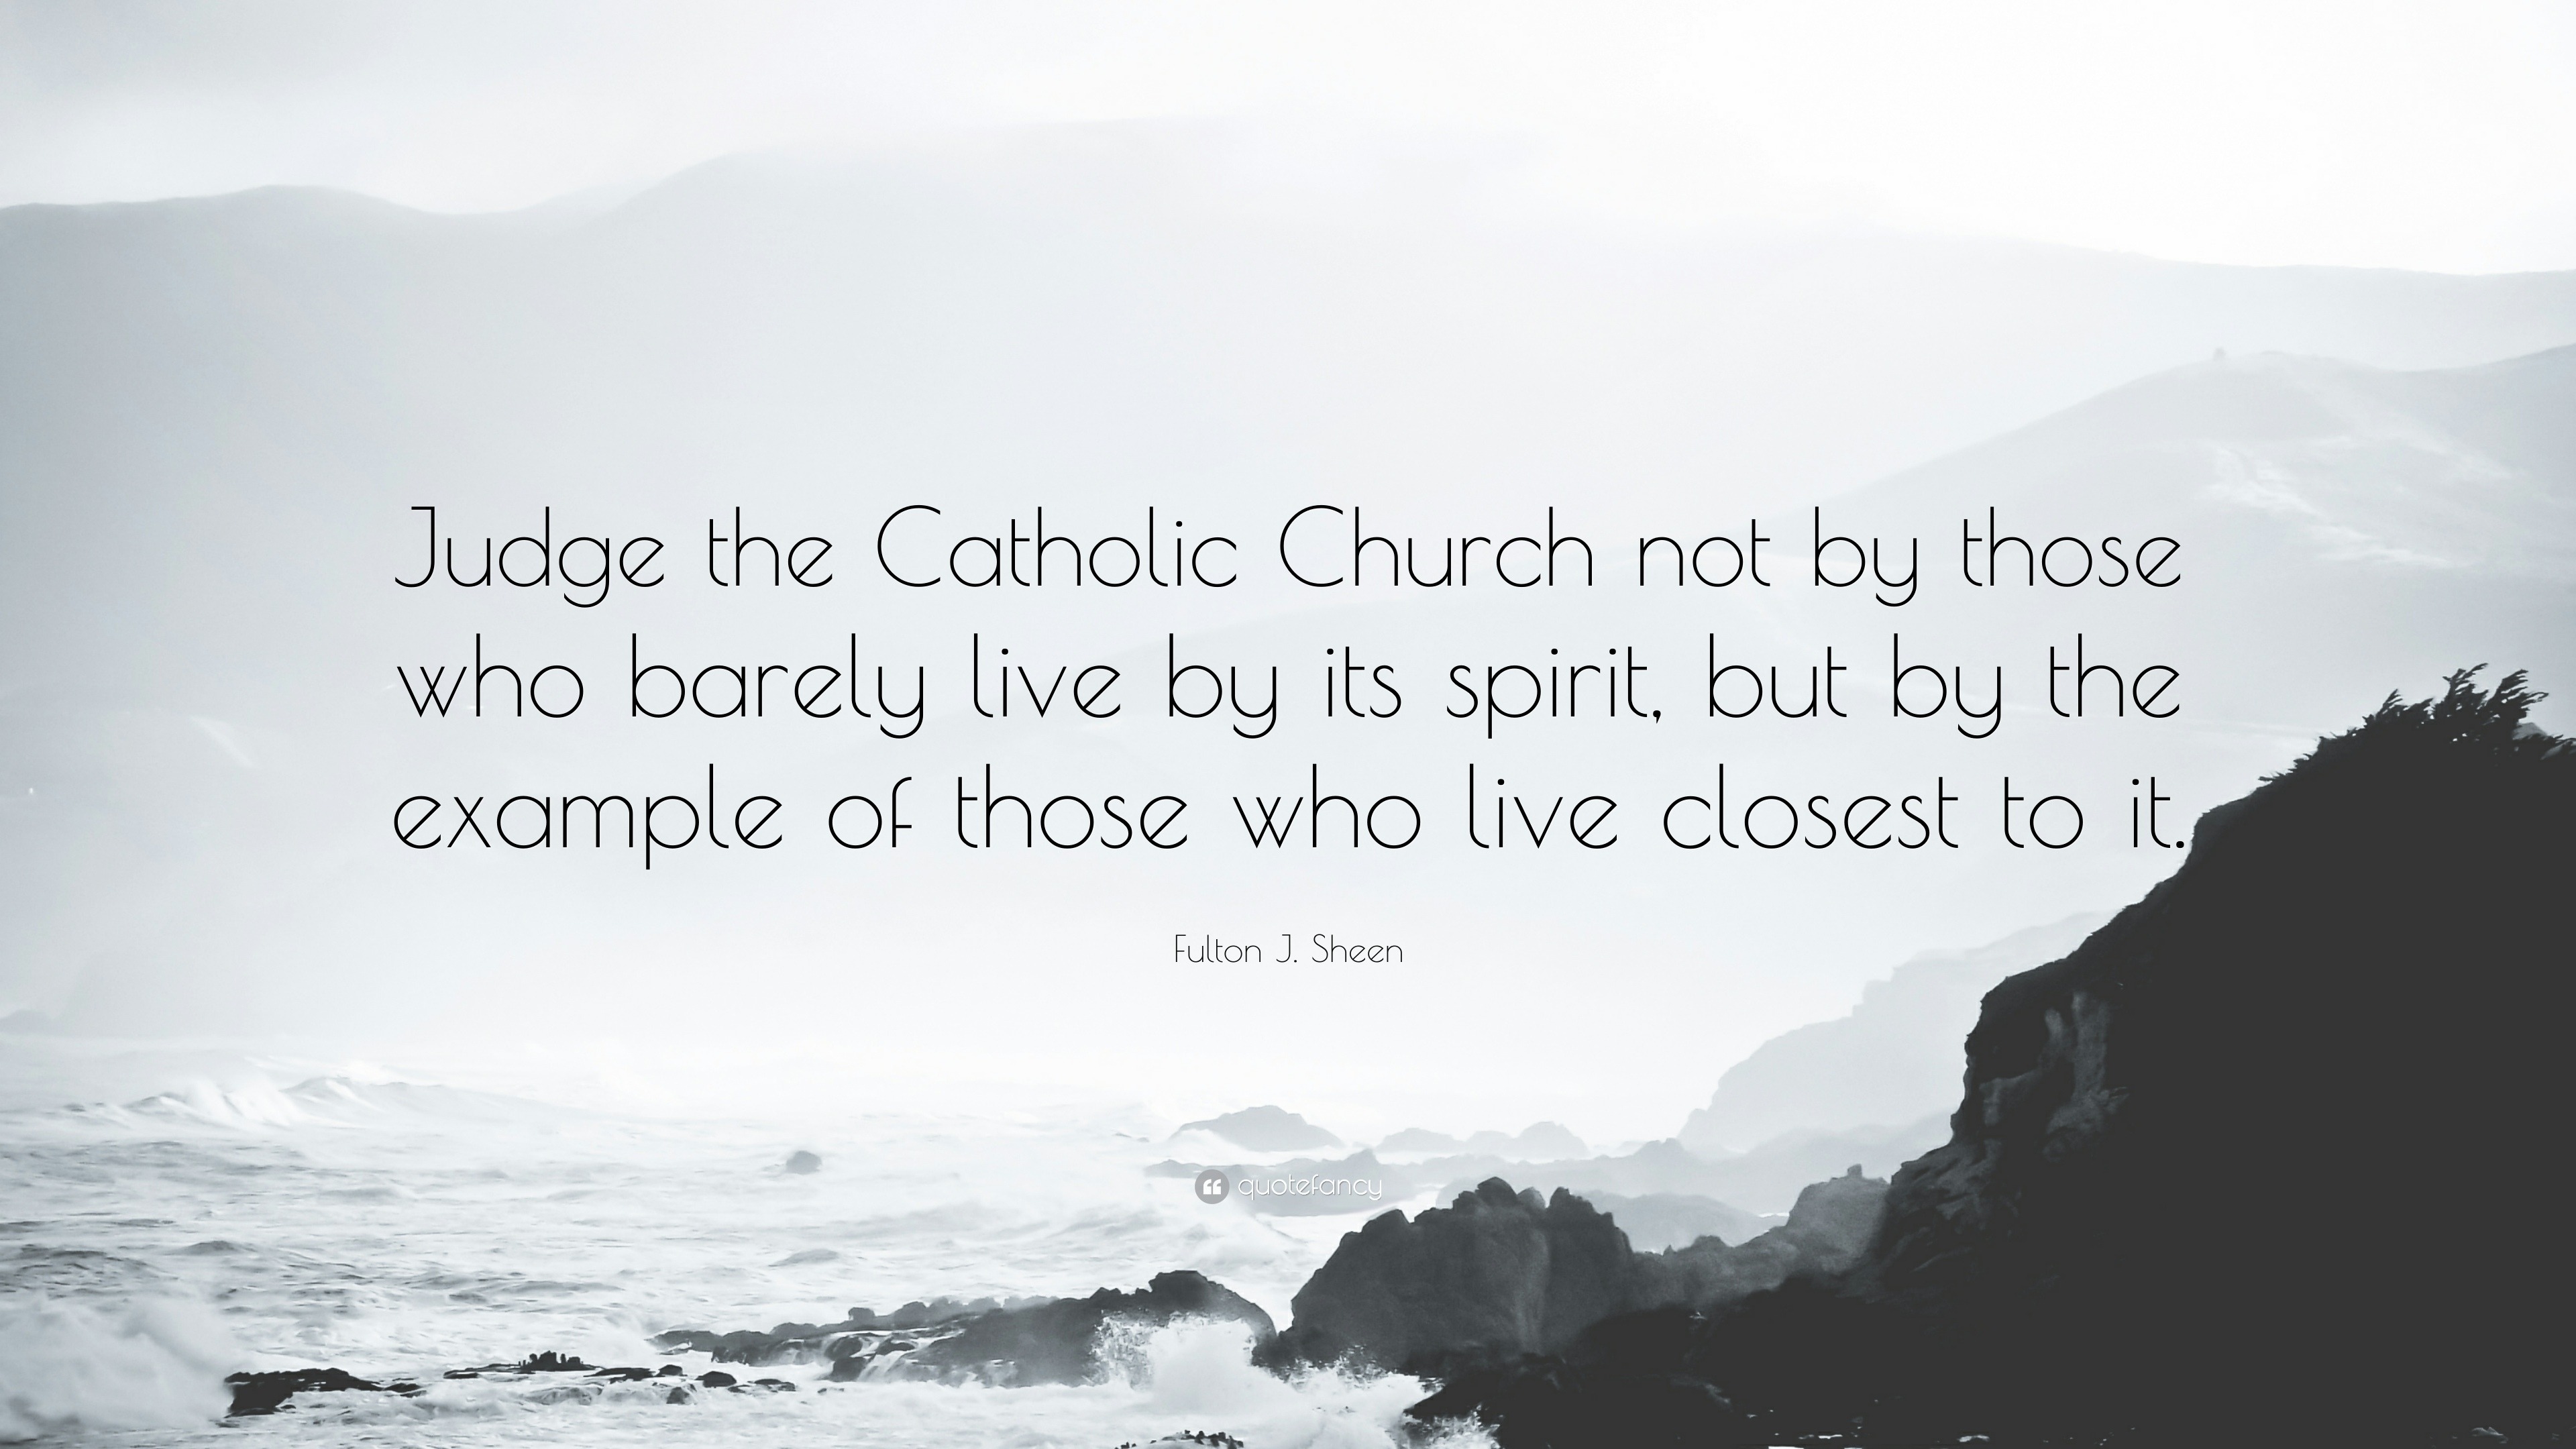 Fulton J. Sheen Quote: “Judge the Catholic Church not by those who